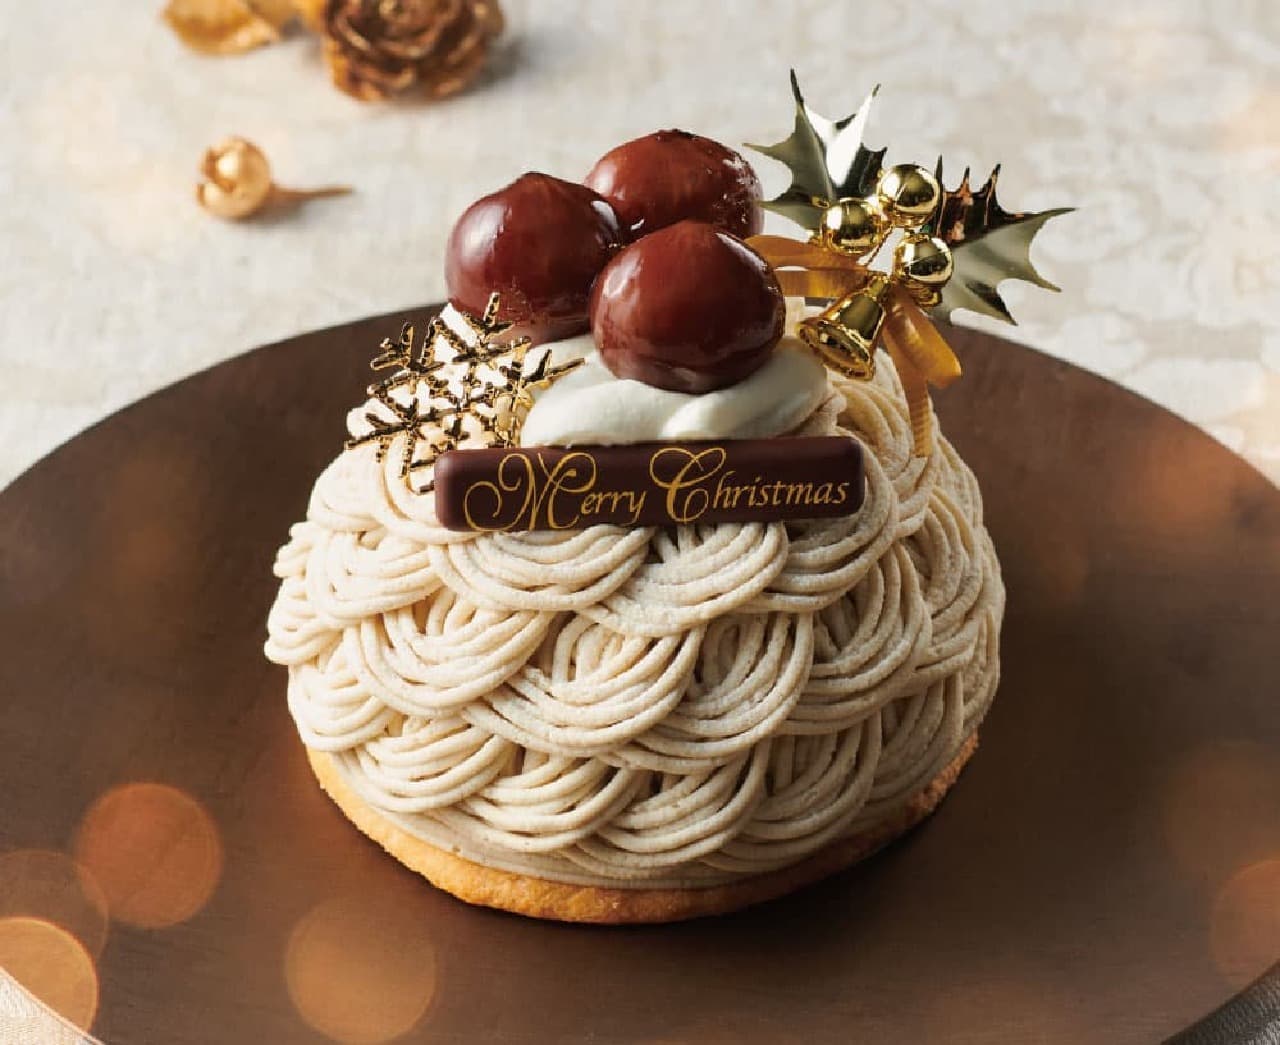 Antenor "Noel Mont Blanc with Japanese Chestnuts